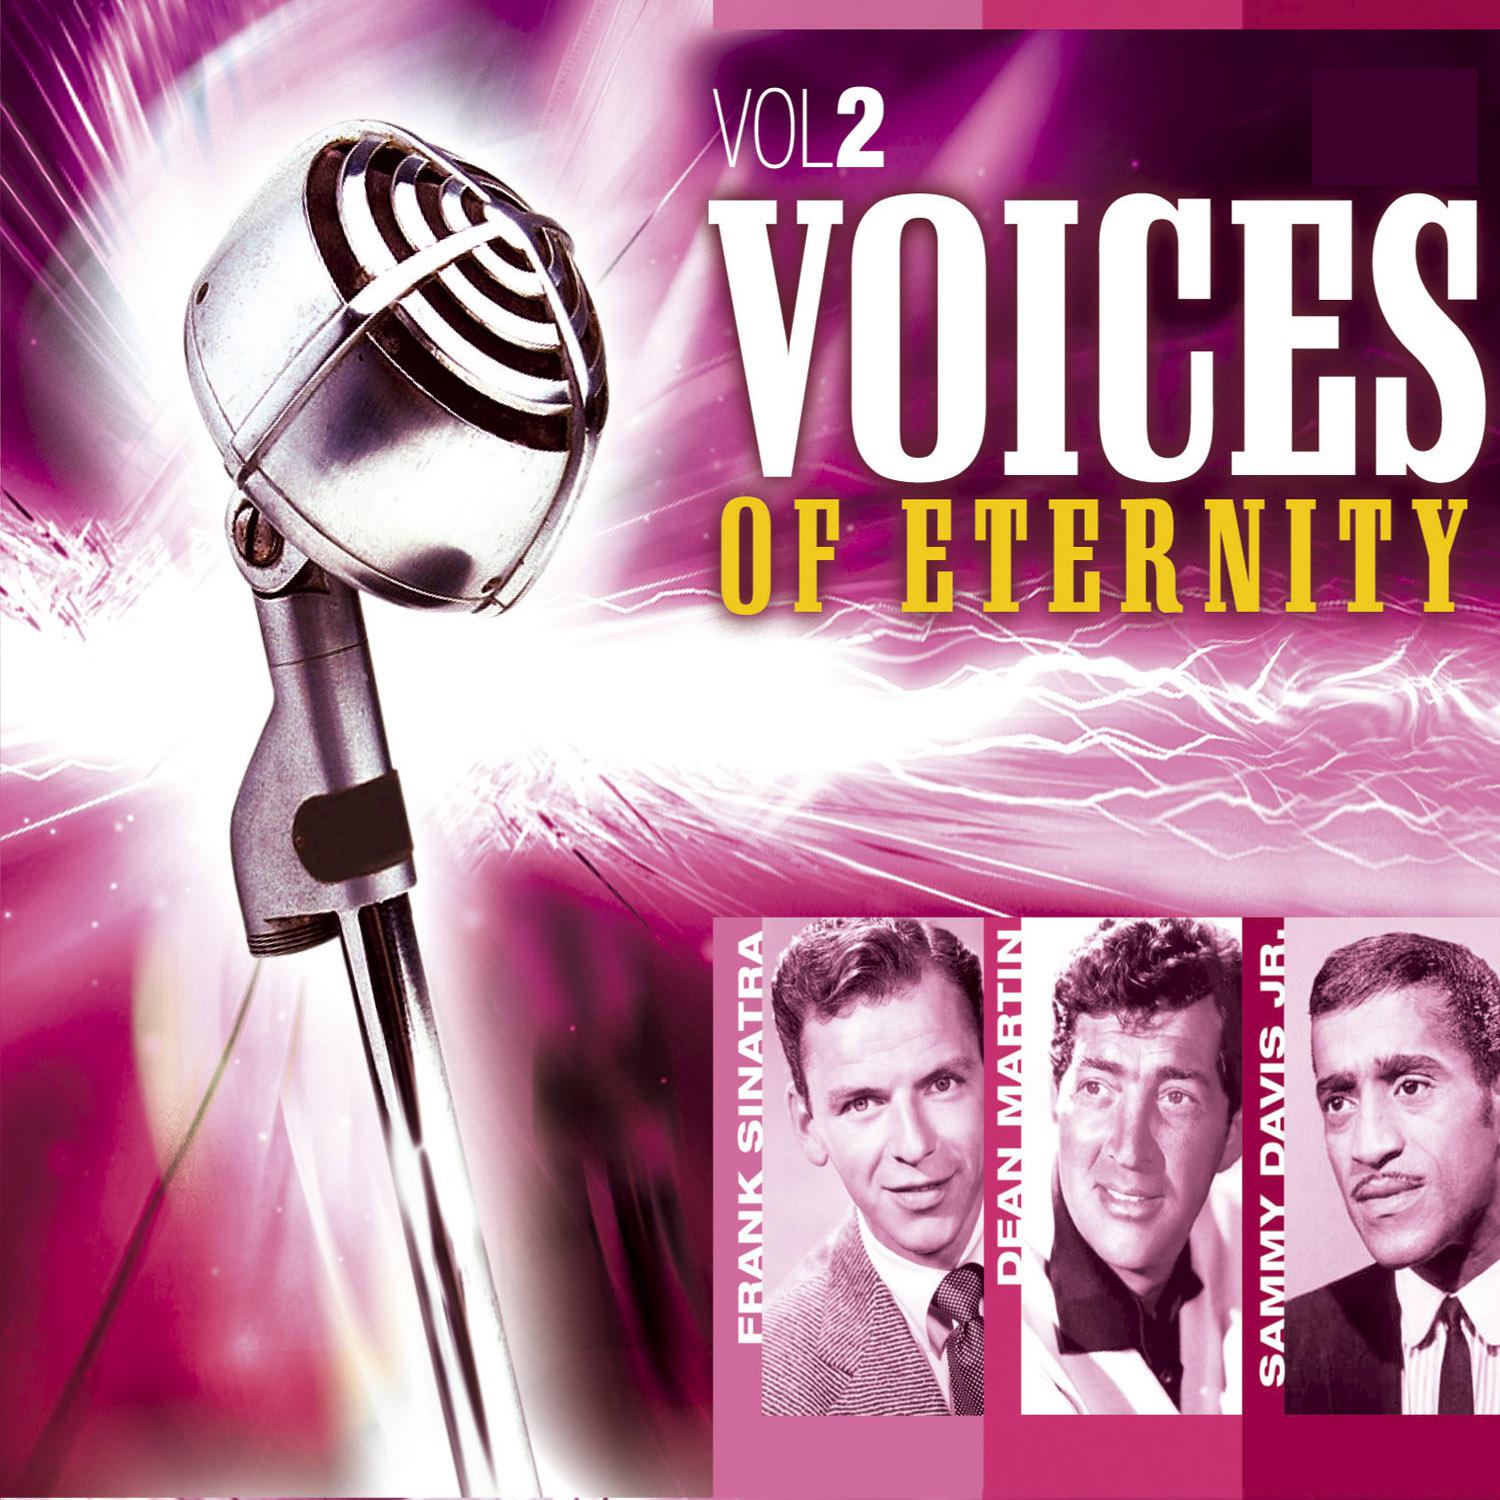 The Voices of Eternity, Vol. 2